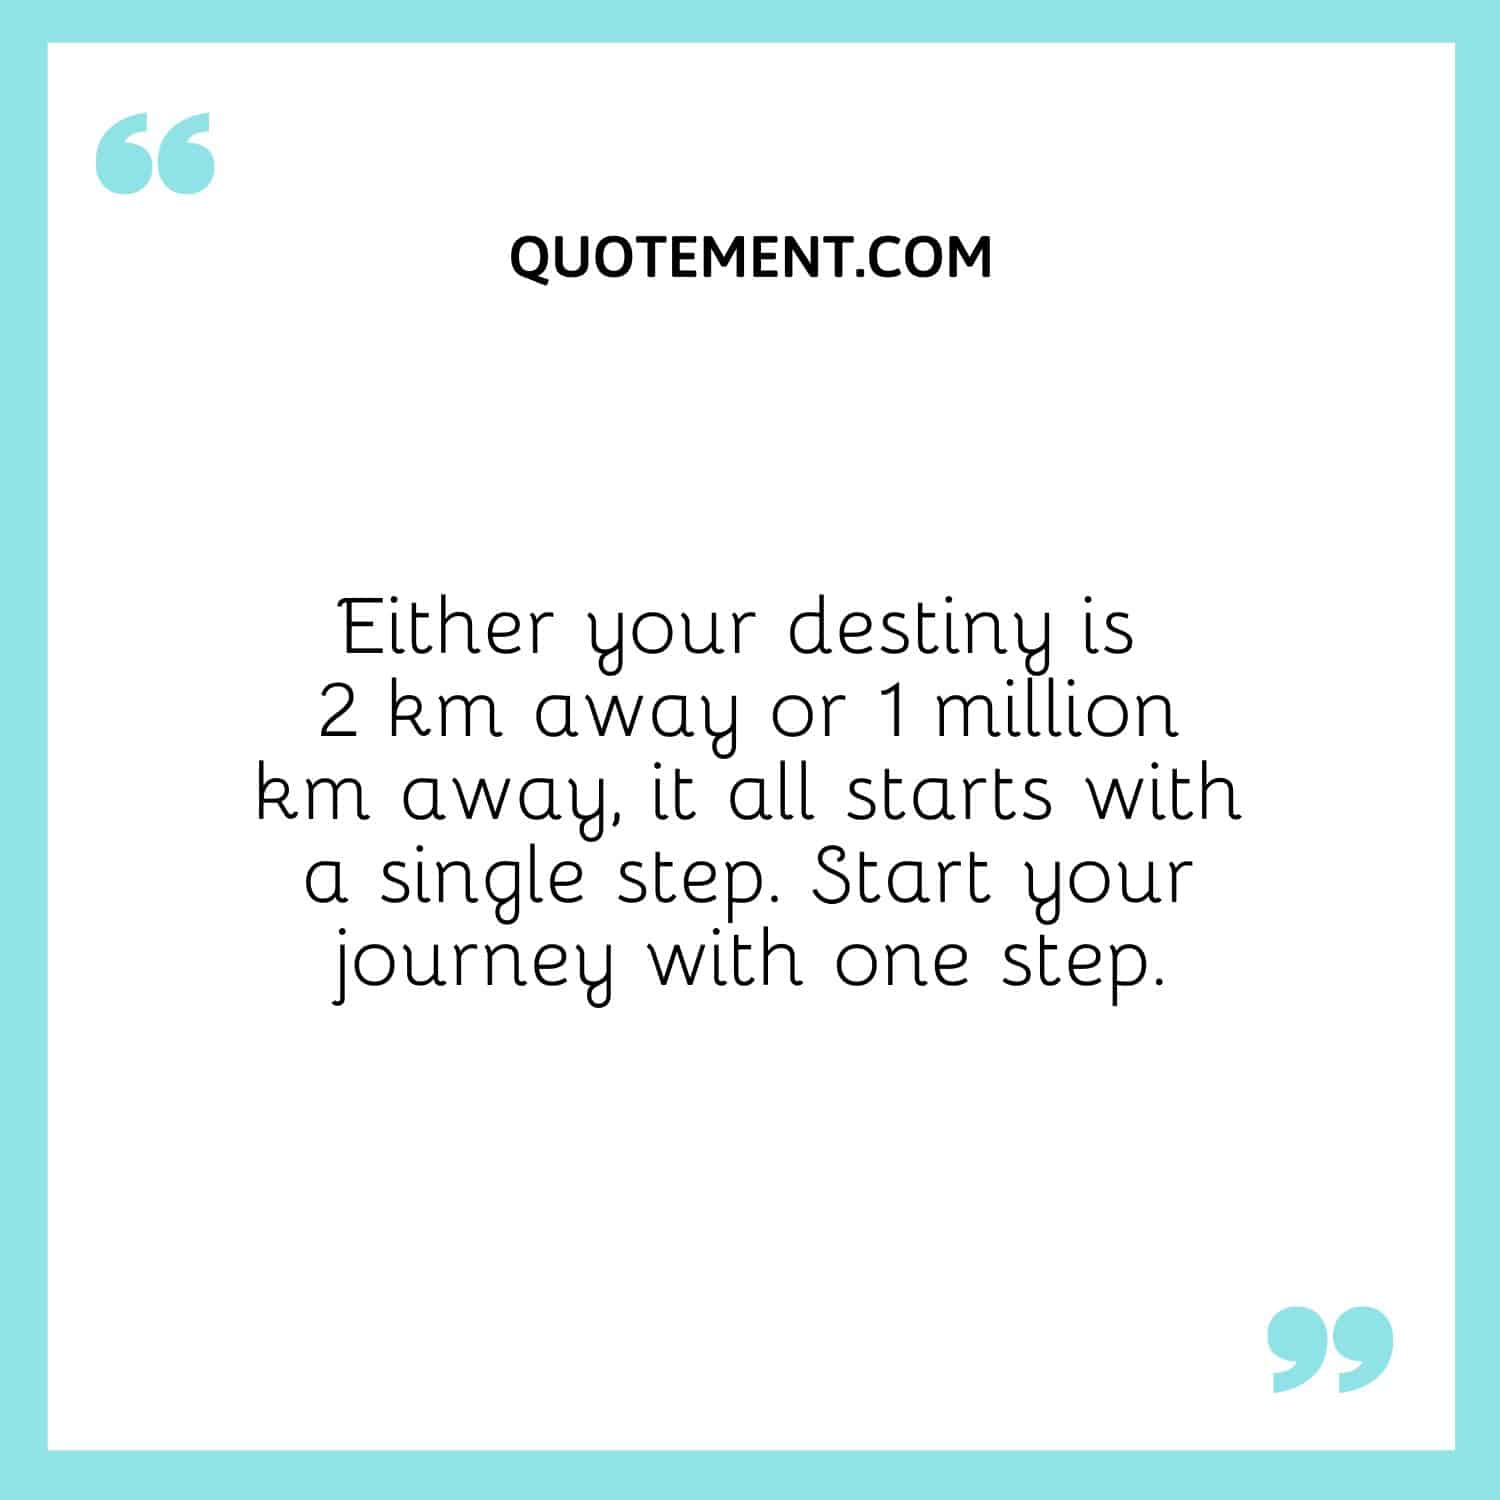 Either your destiny is 2 km away or 1 million km away, it all starts with a single step. Start your journey with one step.